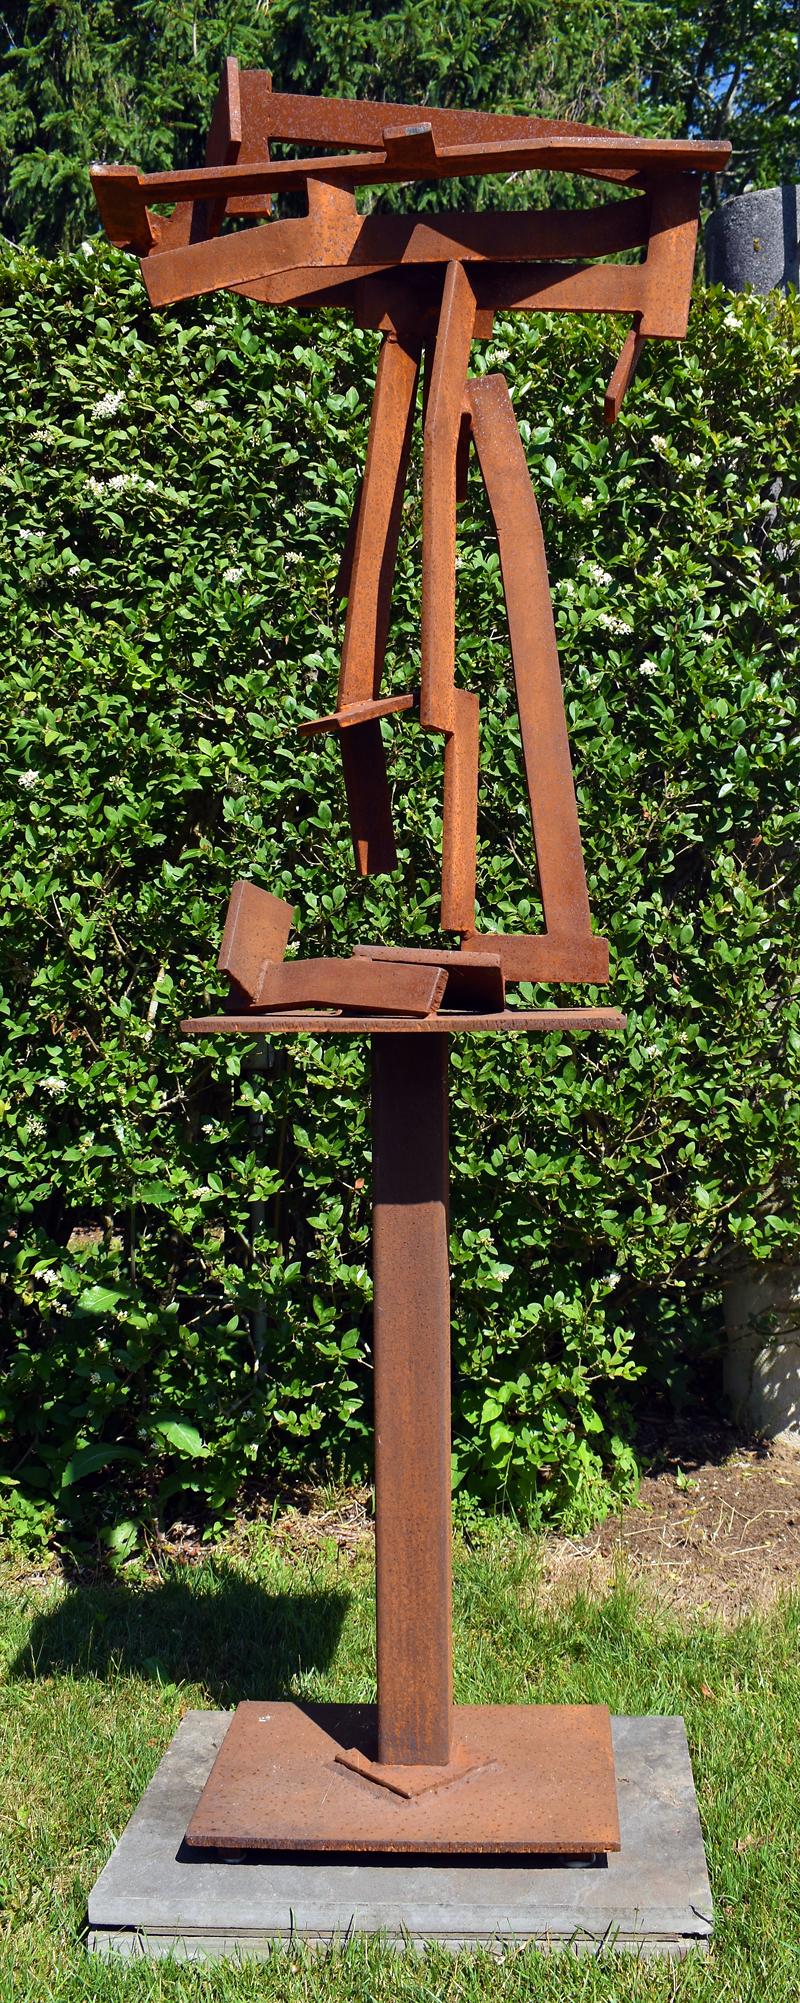 "Red Ryder" Large-Scale, Abstract Metal Sculpture in steel by Joel Perlman